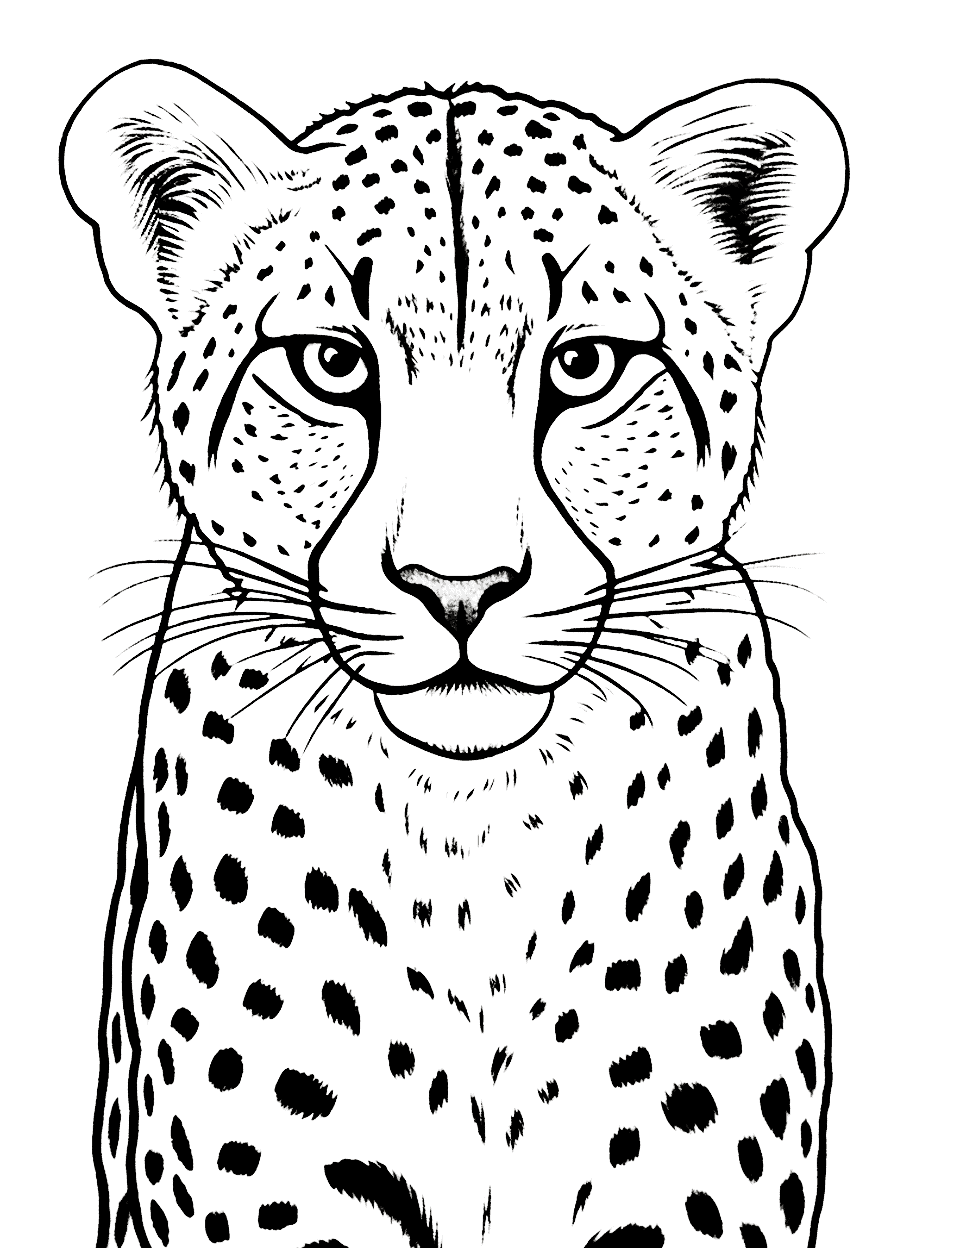 Cheetah Head Sketch Coloring Page - A focused sketch of a cheetah’s head with emphasis on the eyes.